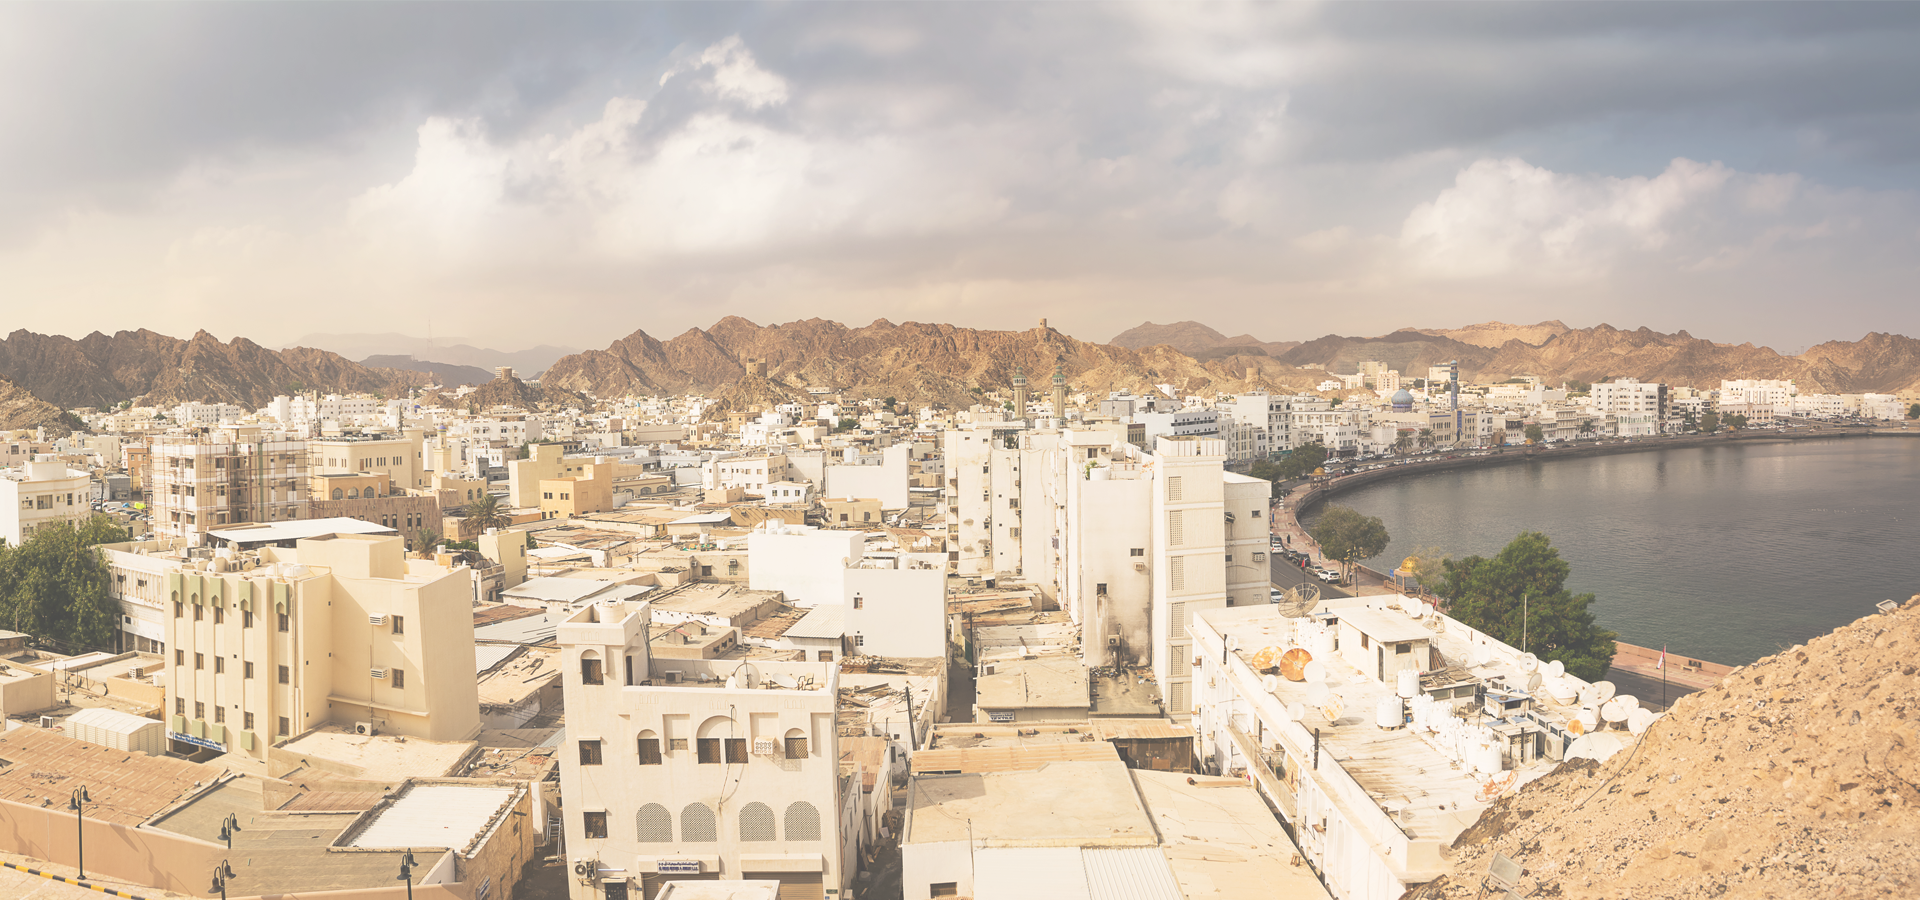 <b>Asia/Muscat/Muscat_Governorate/Muscat</b>